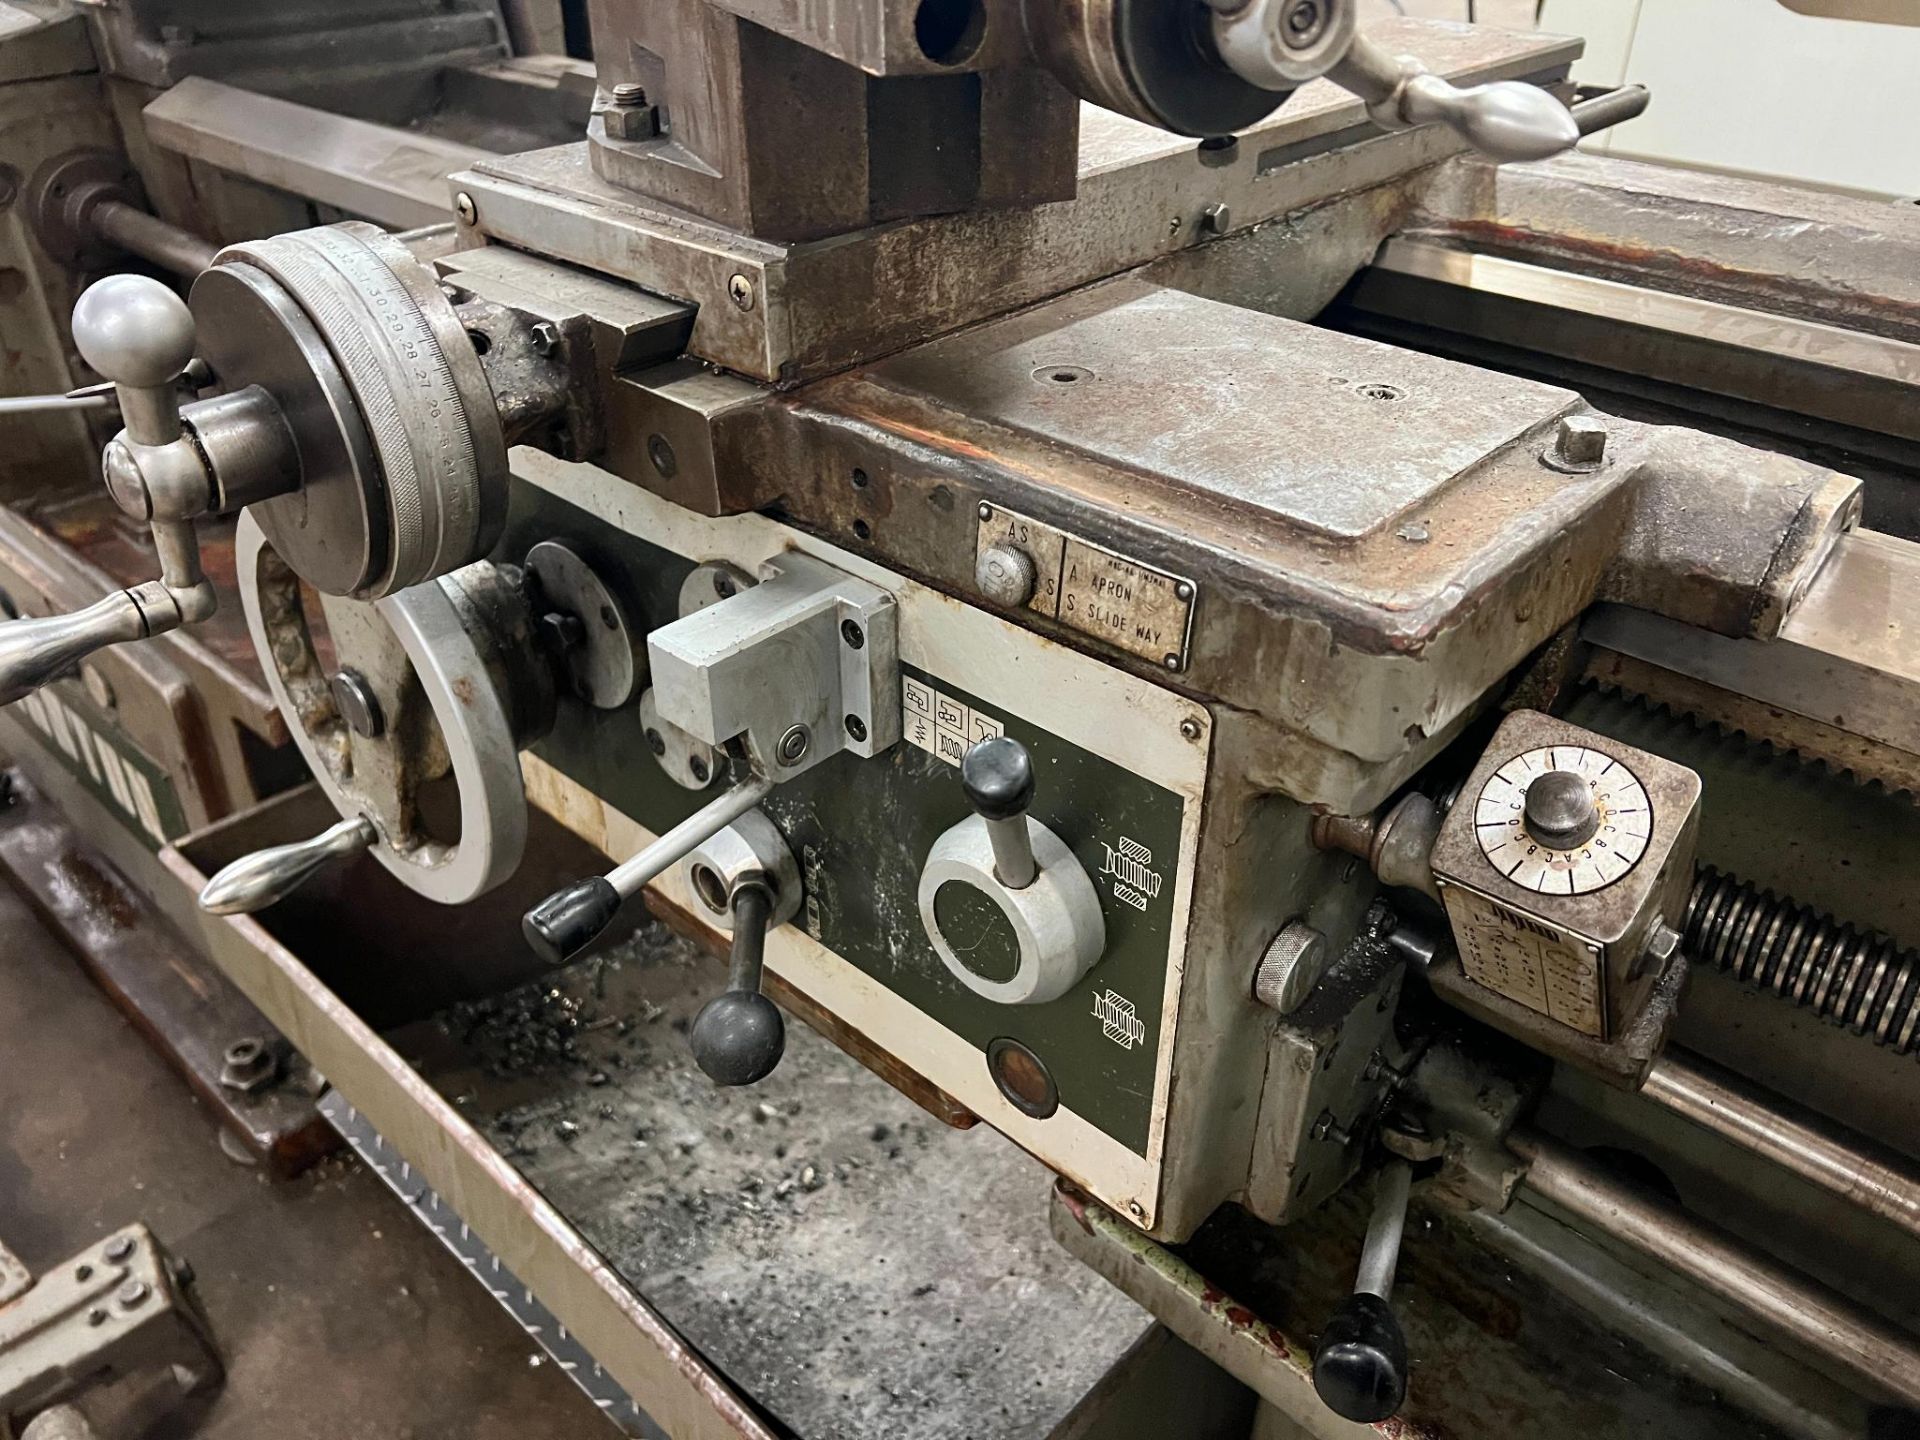 Kingston HLC-2180 (JIMK530x2000) Gap Bed Engine lathe Serial Number K3099715. 21" x 80" Swing over b - Image 11 of 21